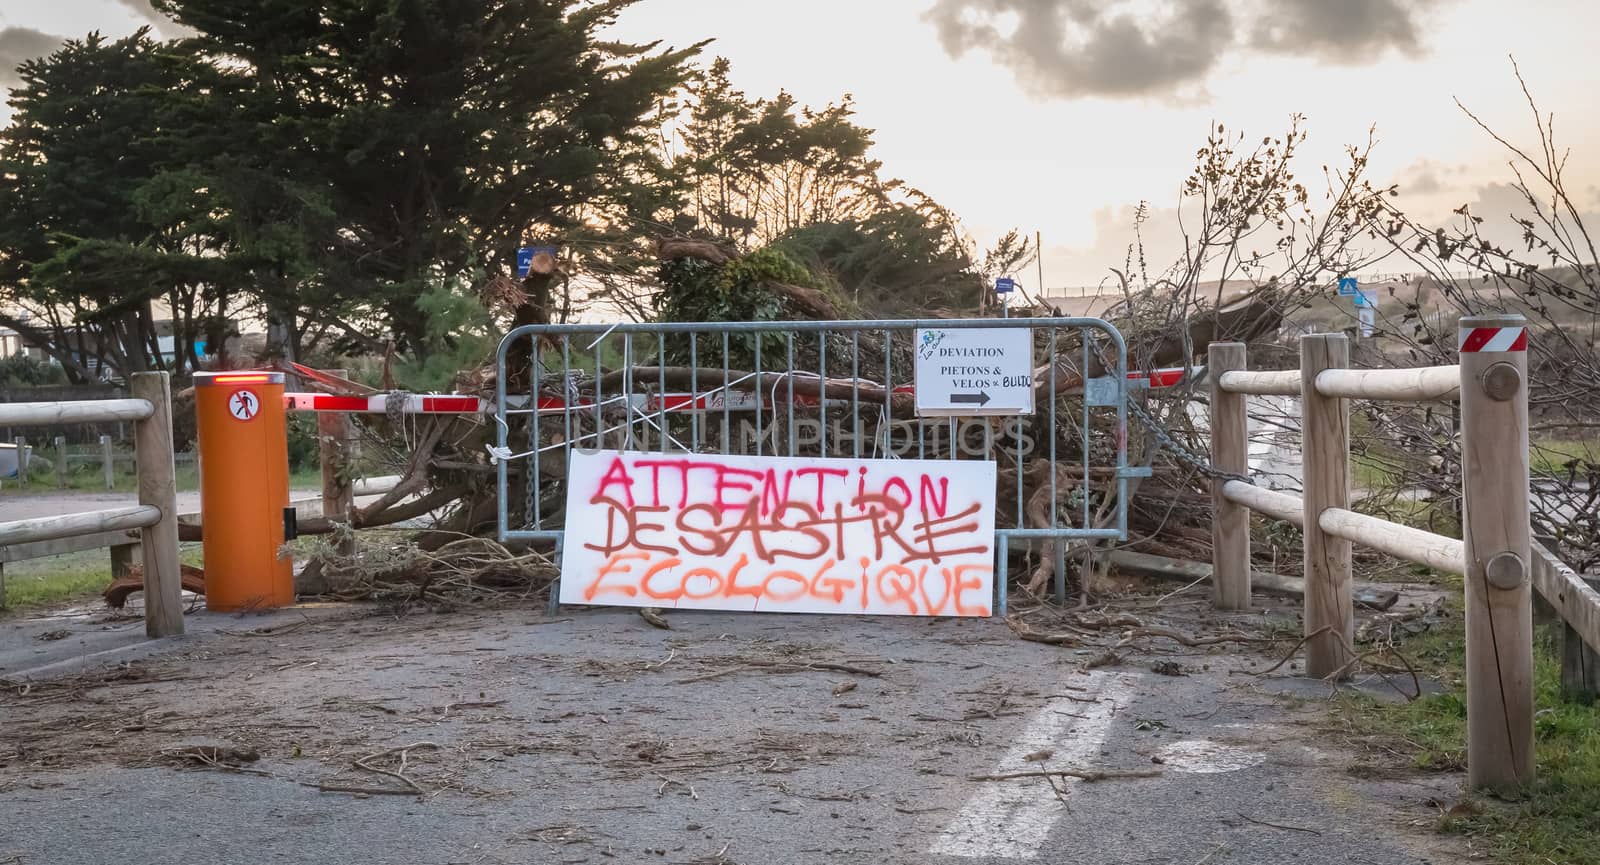 Bretignolles sur Mer, France - October 9, 2019: Attention Ecological Disaster in French on an area of protest in a ZAD (Acronym of Zone to Defend) against the construction of the port of boat